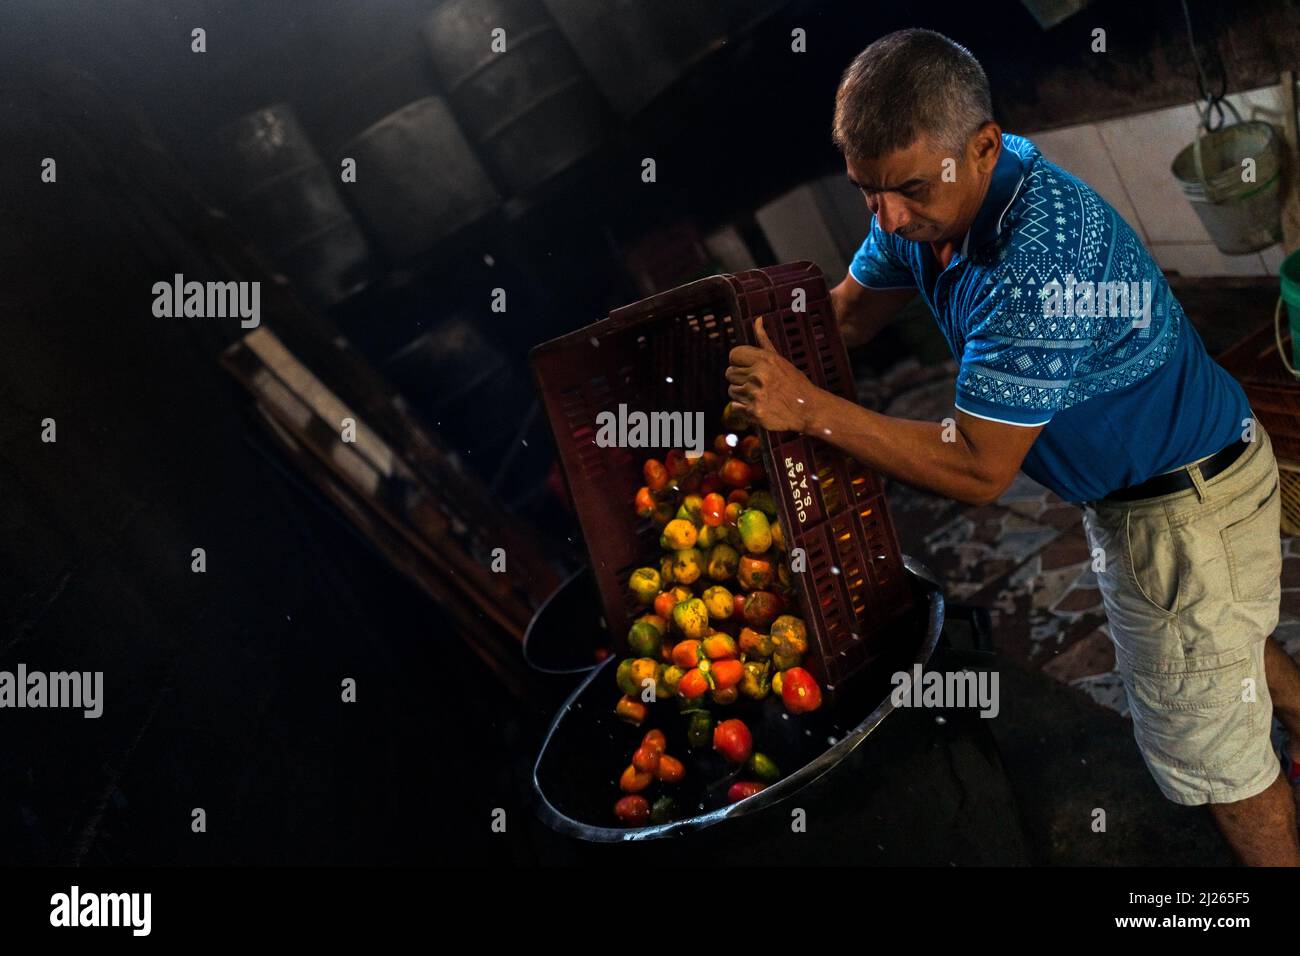 A Colombian man throws raw chontaduro (peach palm) fruits into a cooking barrel in a processing facility in Cali, Valle del Cauca, Colombia. Stock Photo